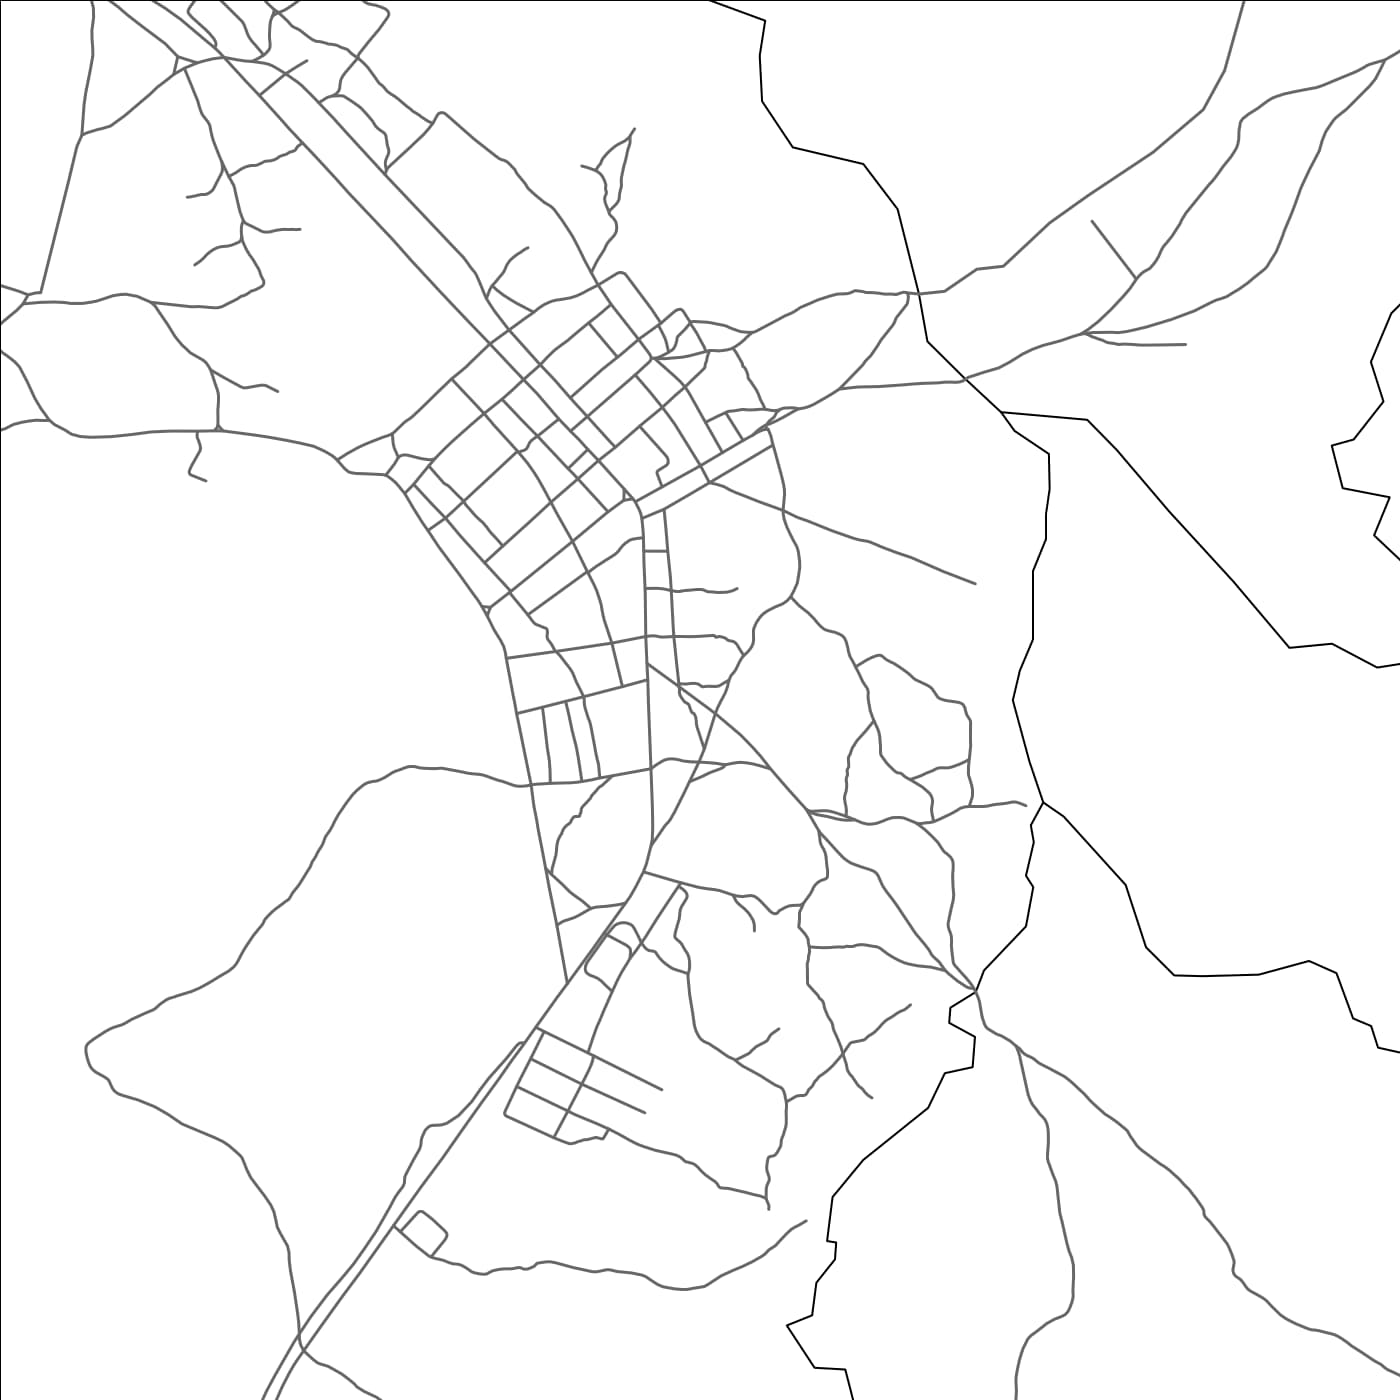 ROAD MAP OF QUILENGUES, ANGOLA BY MAPBAKES